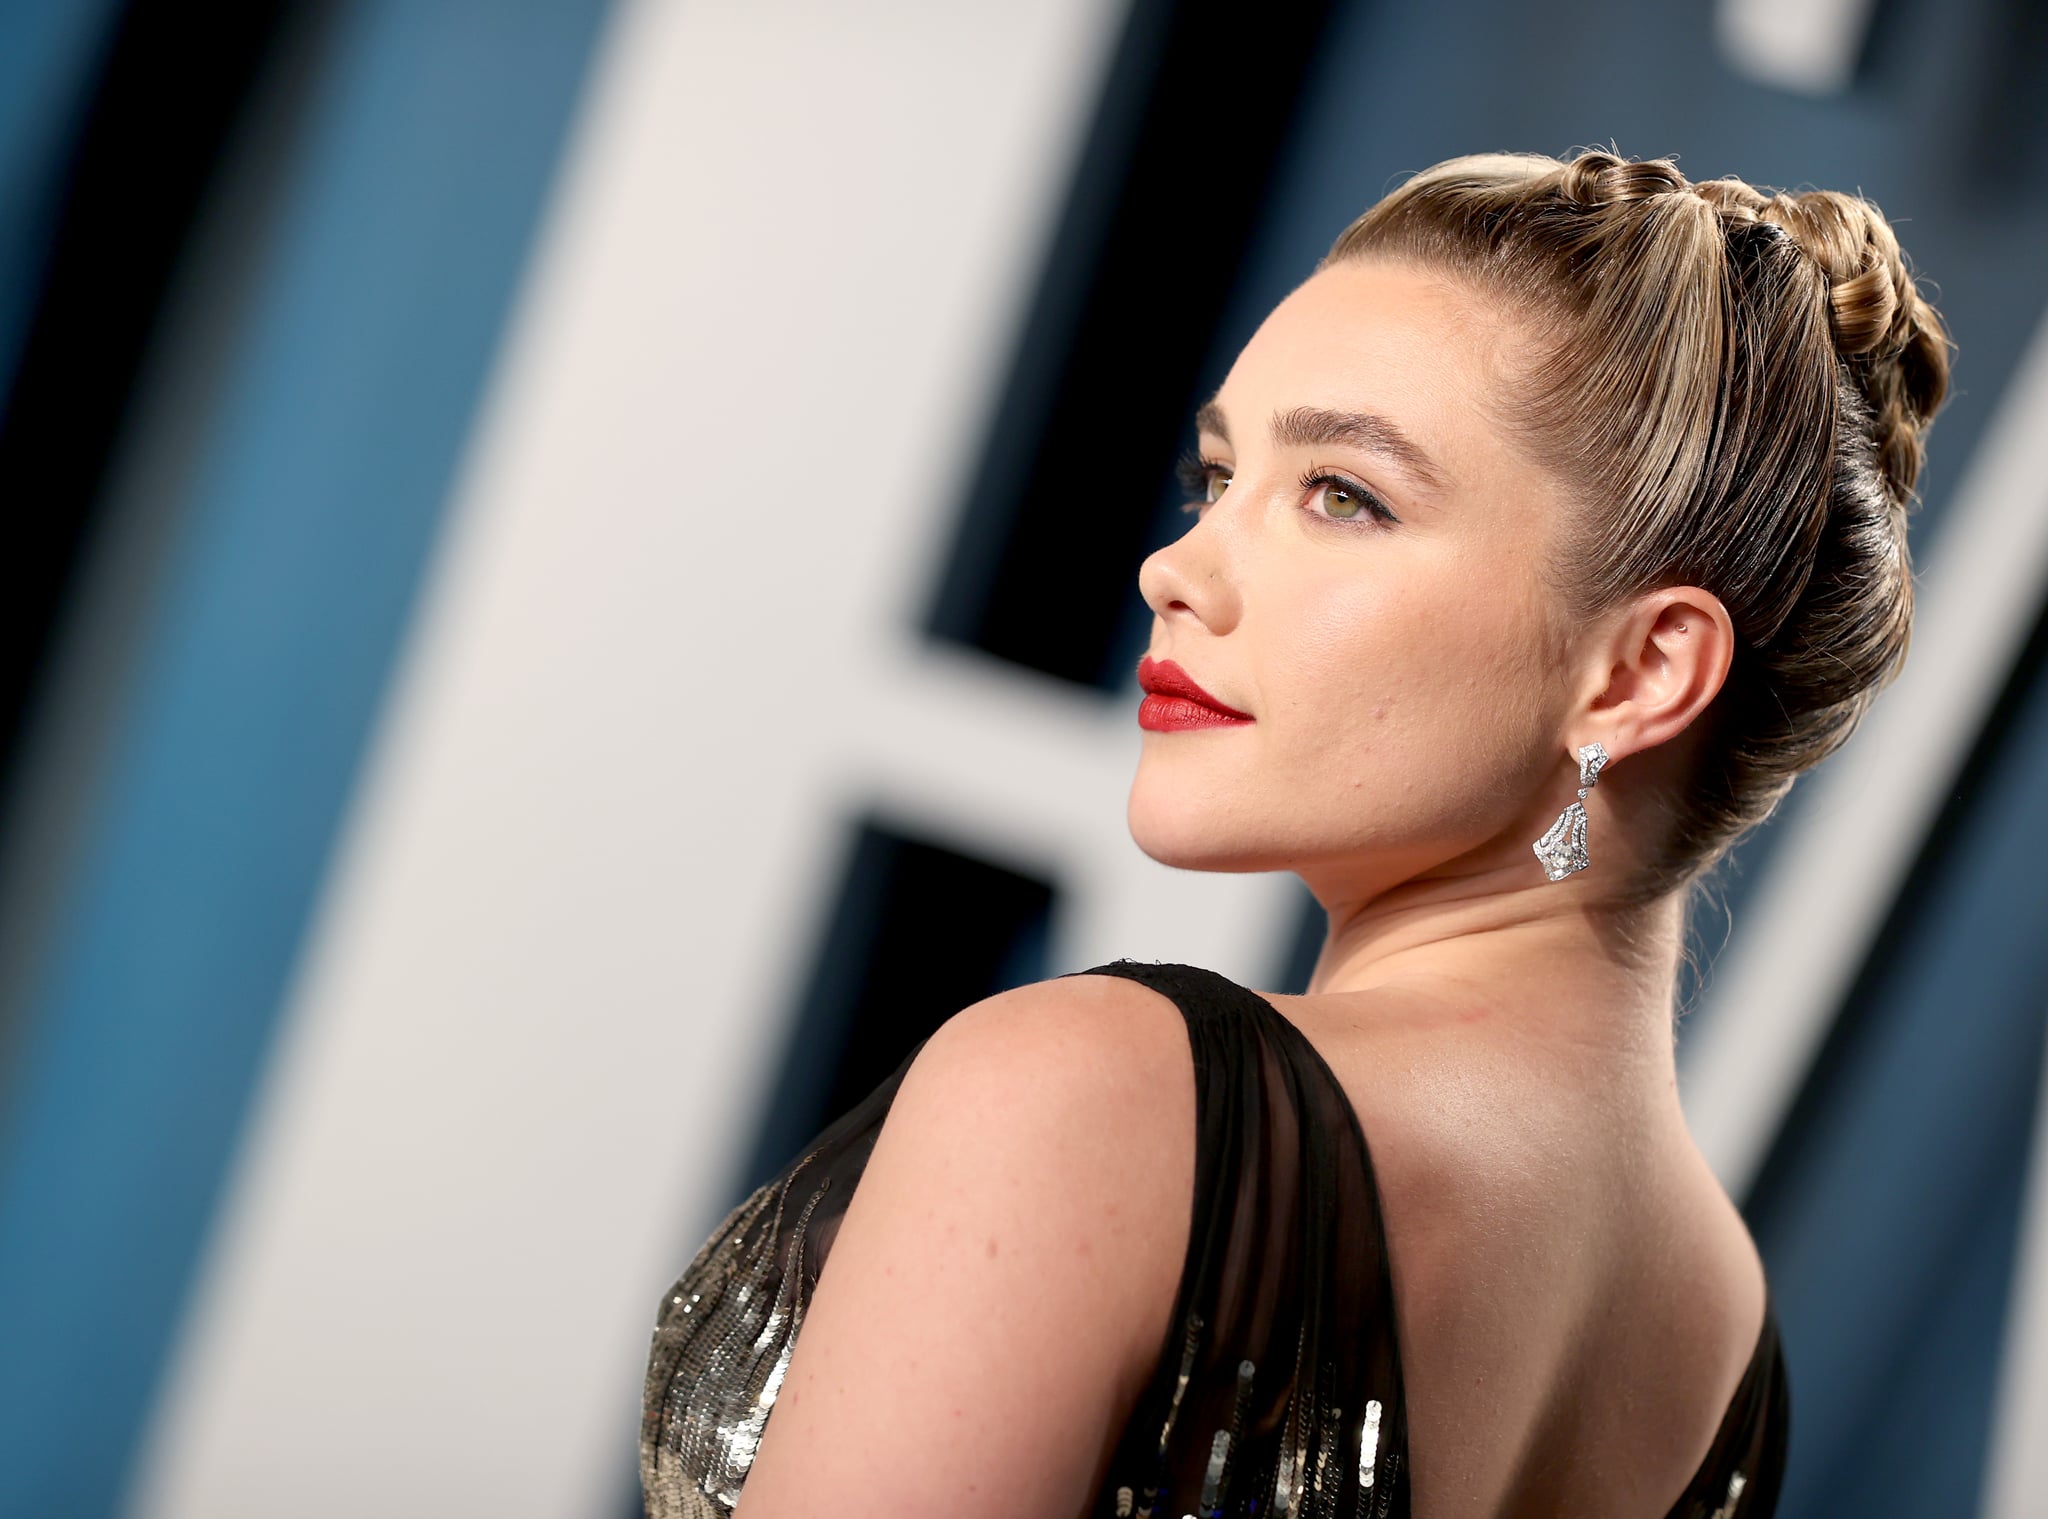 BEVERLY HILLS, CALIFORNIA - FEBRUARY 09: Florence Pugh attends the 2020 Vanity Fair Oscar Party hosted by Radhika Jones at Wallis Annenberg Centre for the Performing Arts on February 09, 2020 in Beverly Hills, California. (Photo by Rich Fury/VF20/Getty Images for Vanity Fair)